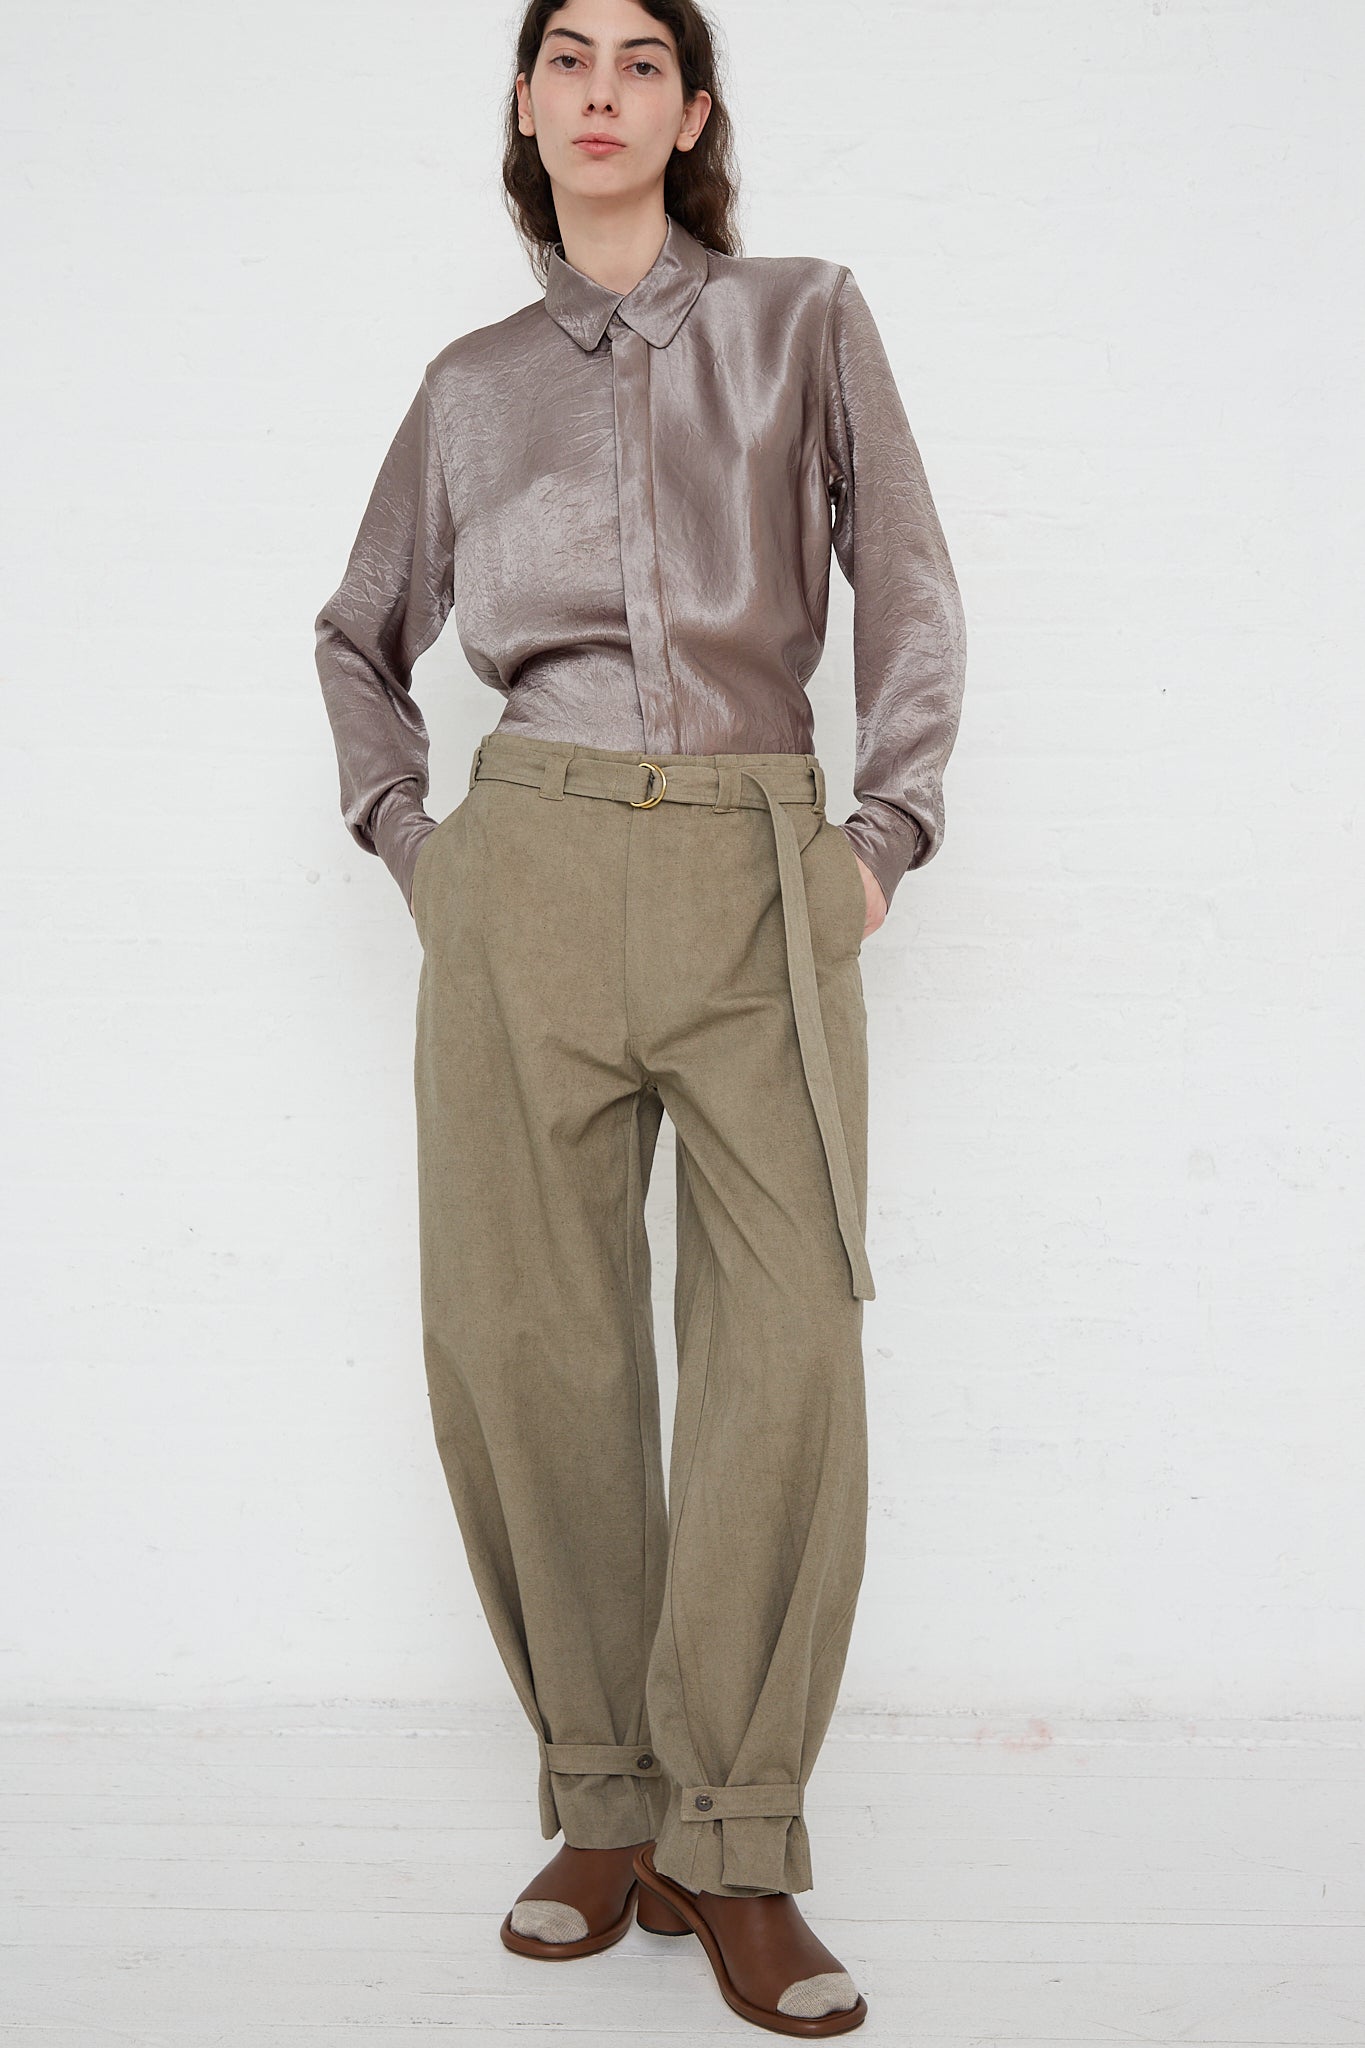 A woman wearing a brown shirt and khaki Belted Trouser in Fatigue pants made of cotton linen blend by Lauren Manoogian.